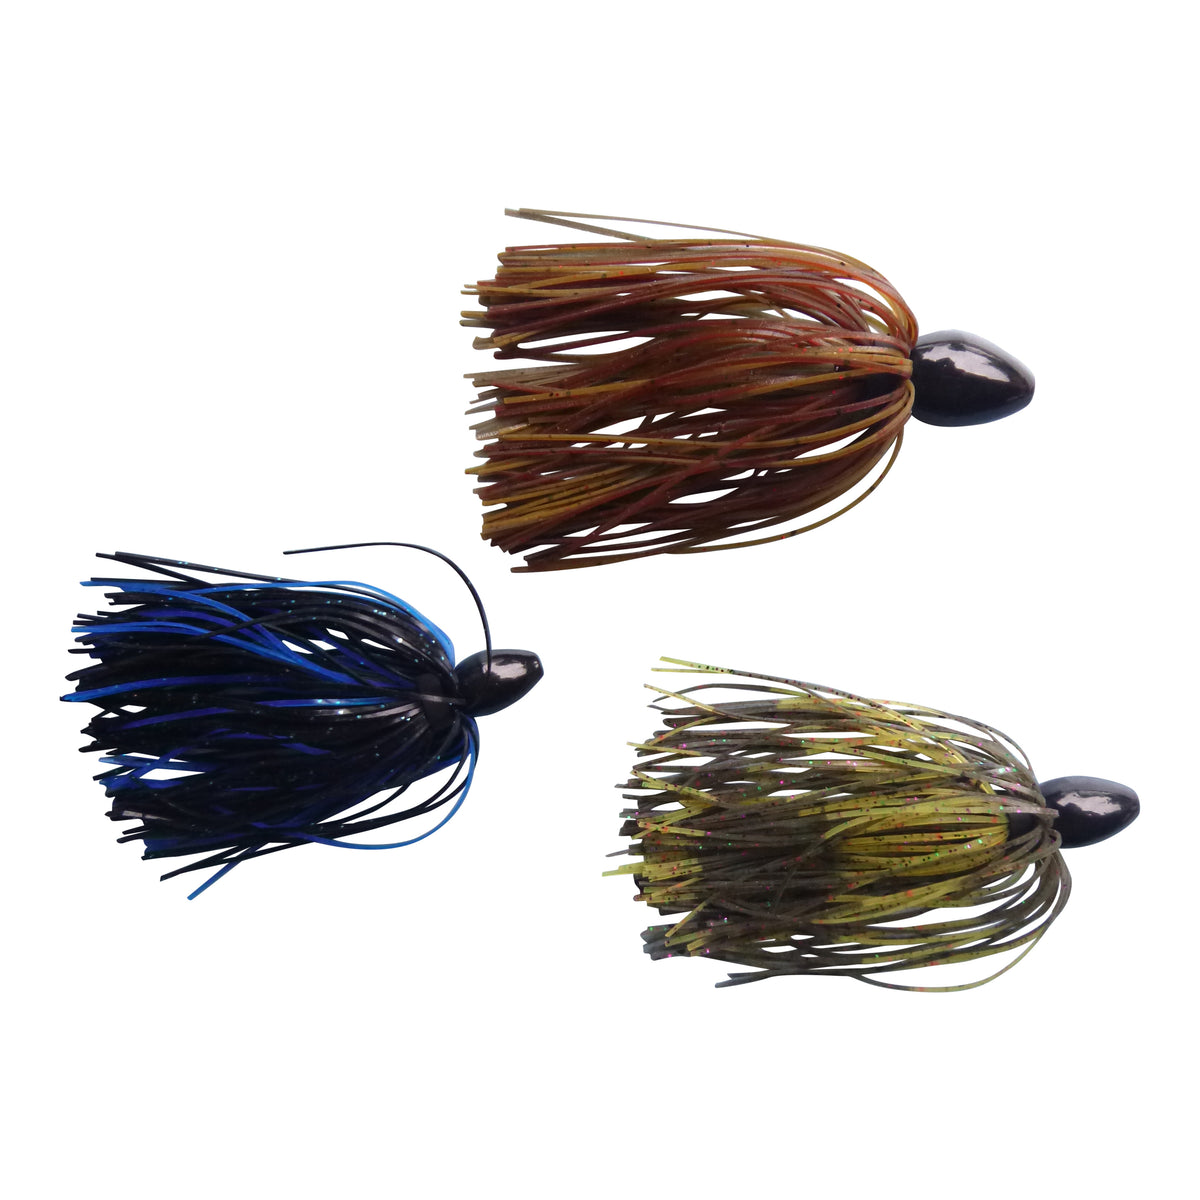 Dropper type Bait Rigs and Weedless soft plastic Rigs are